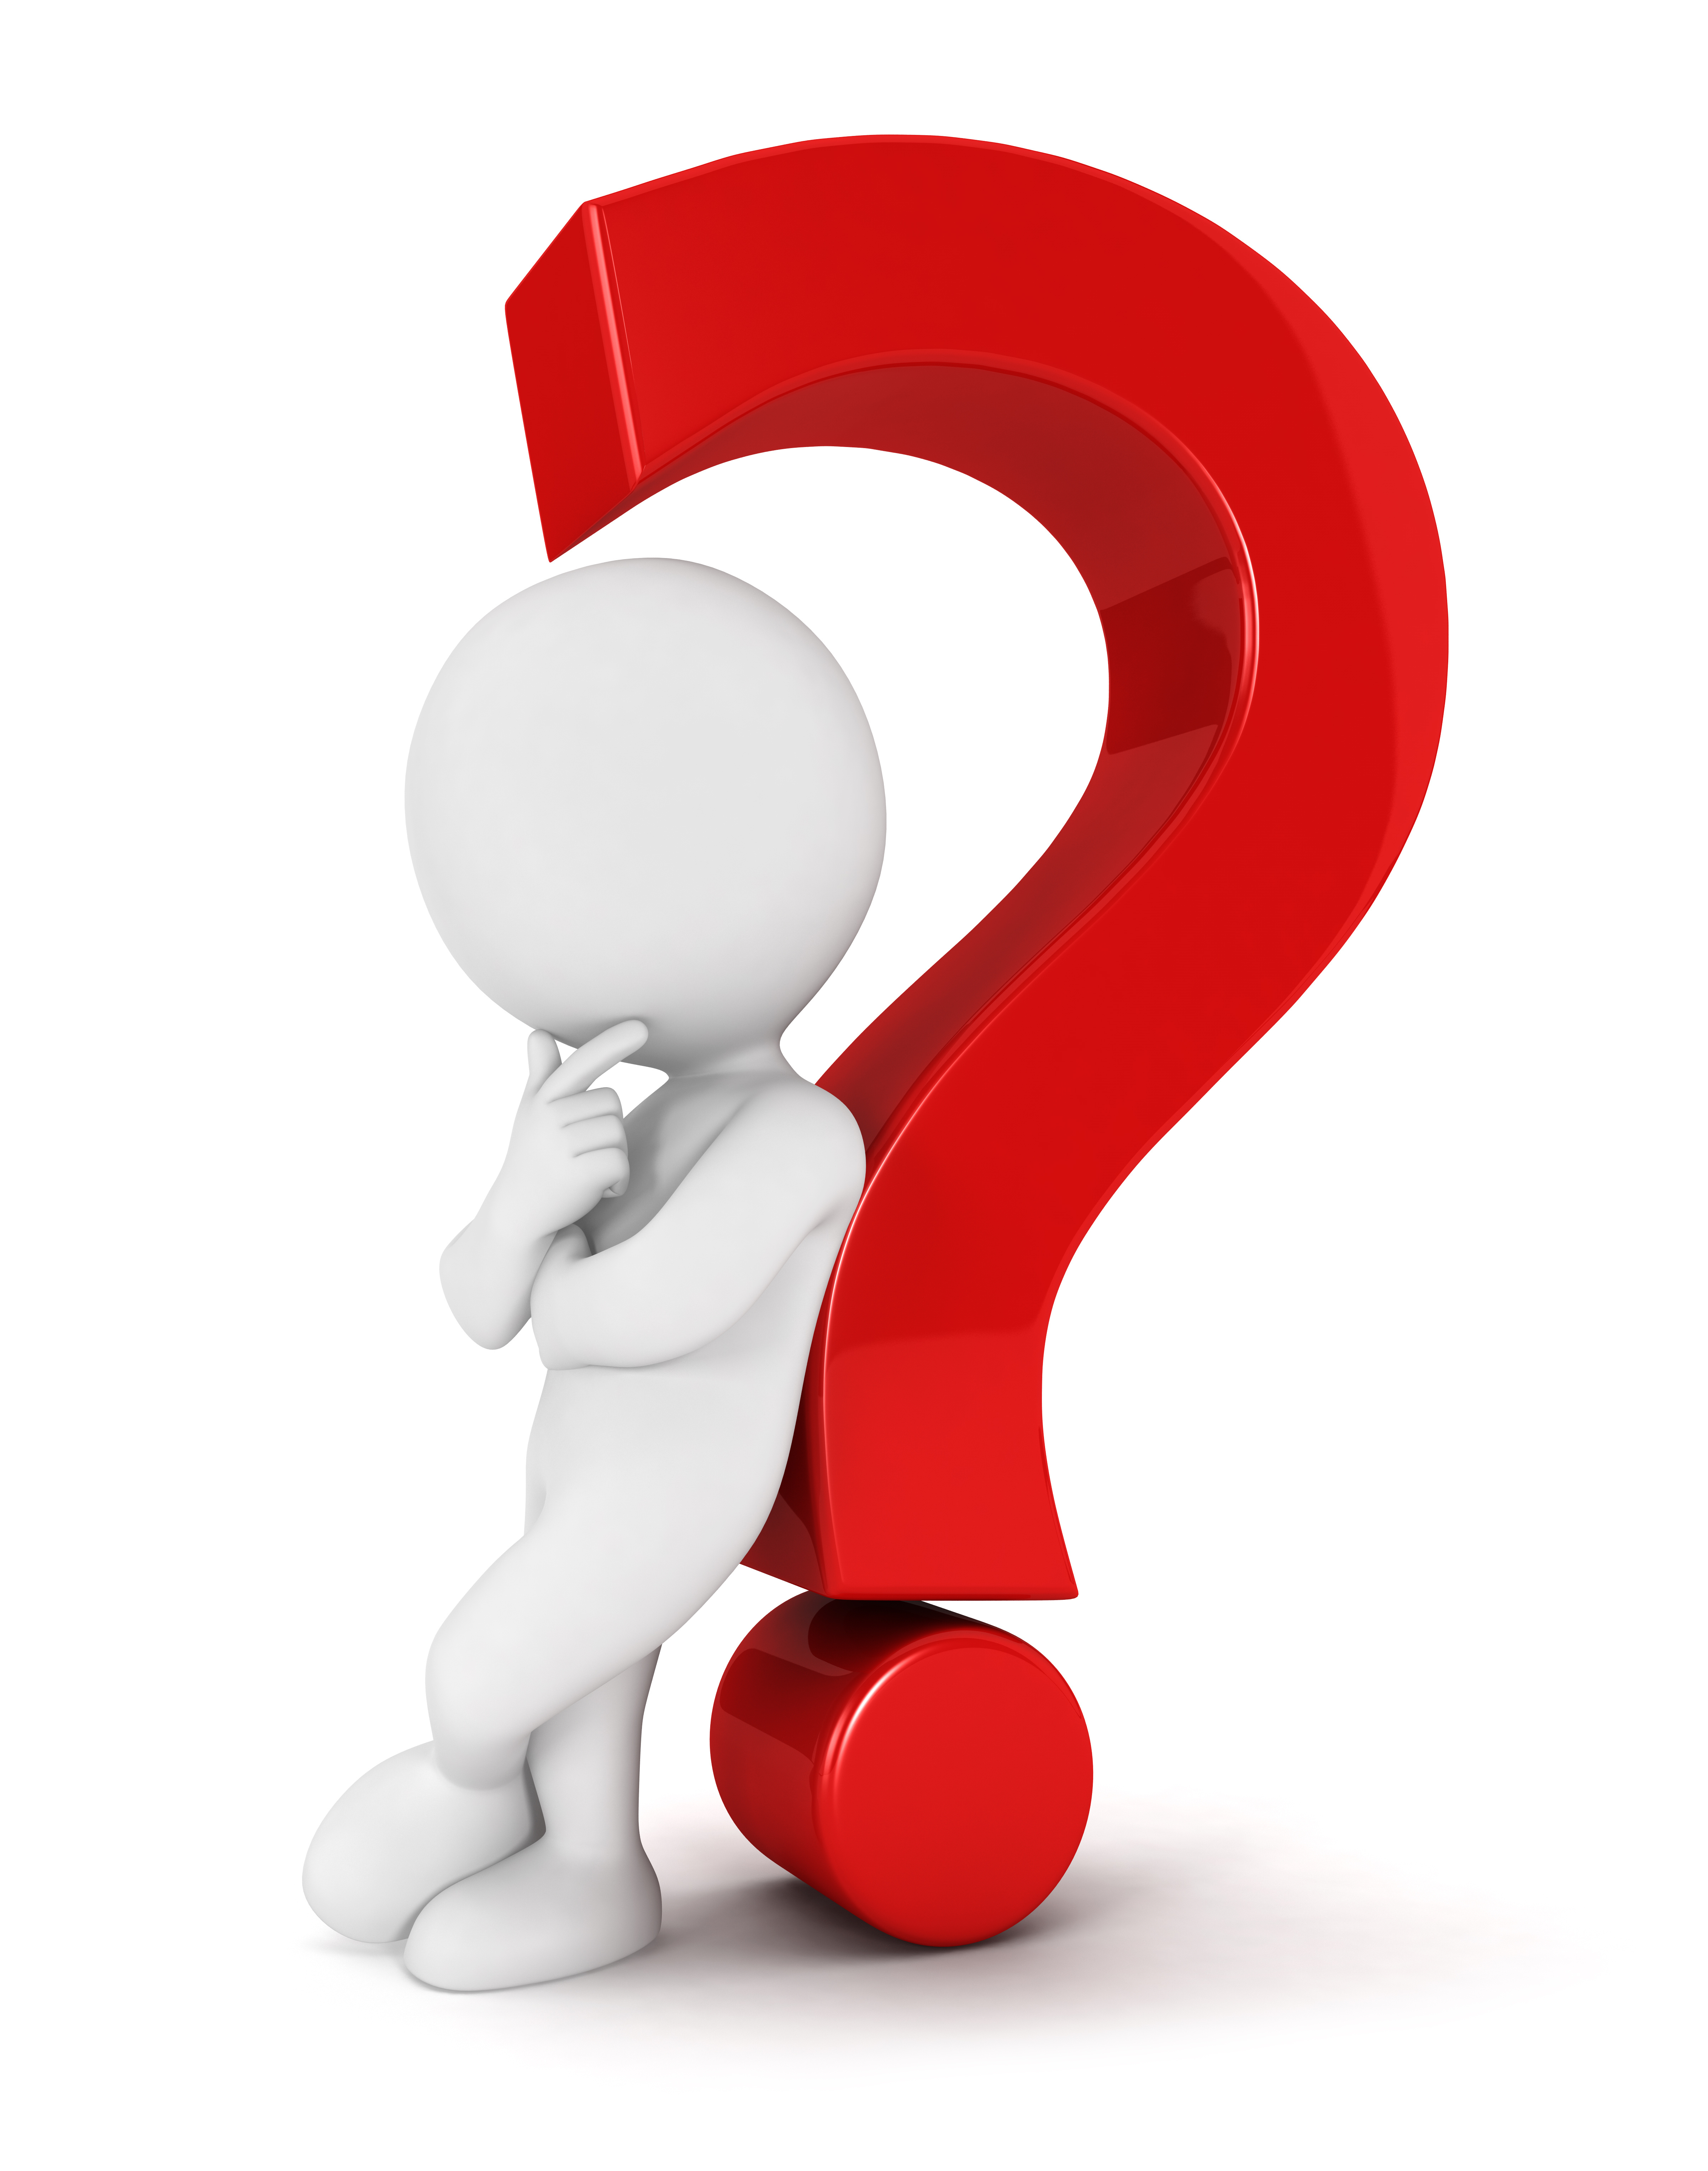 Free Question Mark Images, Download Free Clip Art, Free ...